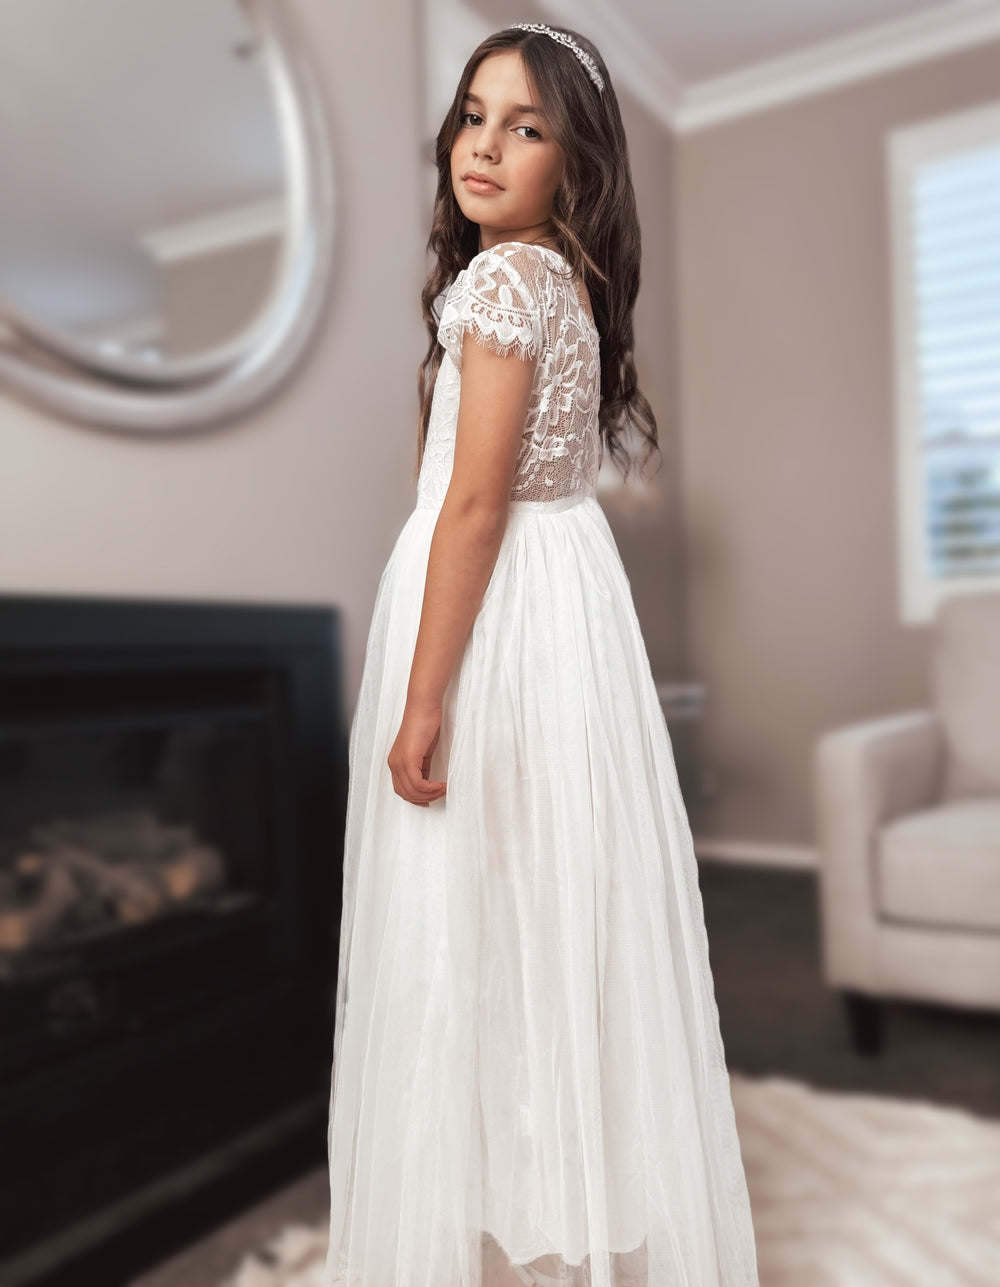 Celeste Girls White Lace & Tulle Dress - BestsellersWhite first communion dress - lace